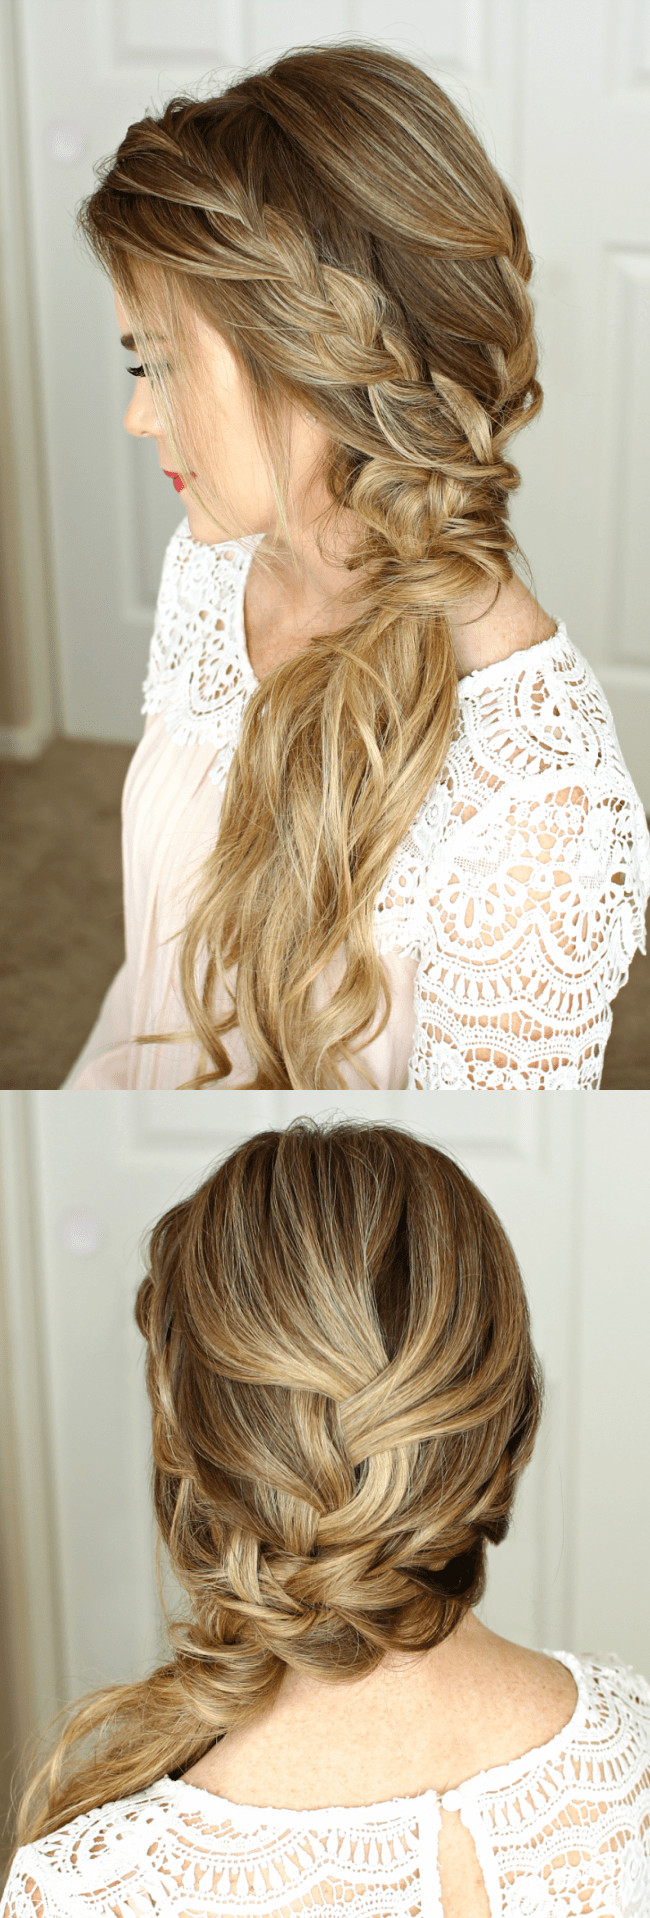 Side Swept Hairstyle For Prom
 Braided Side Swept Prom Hairstyle